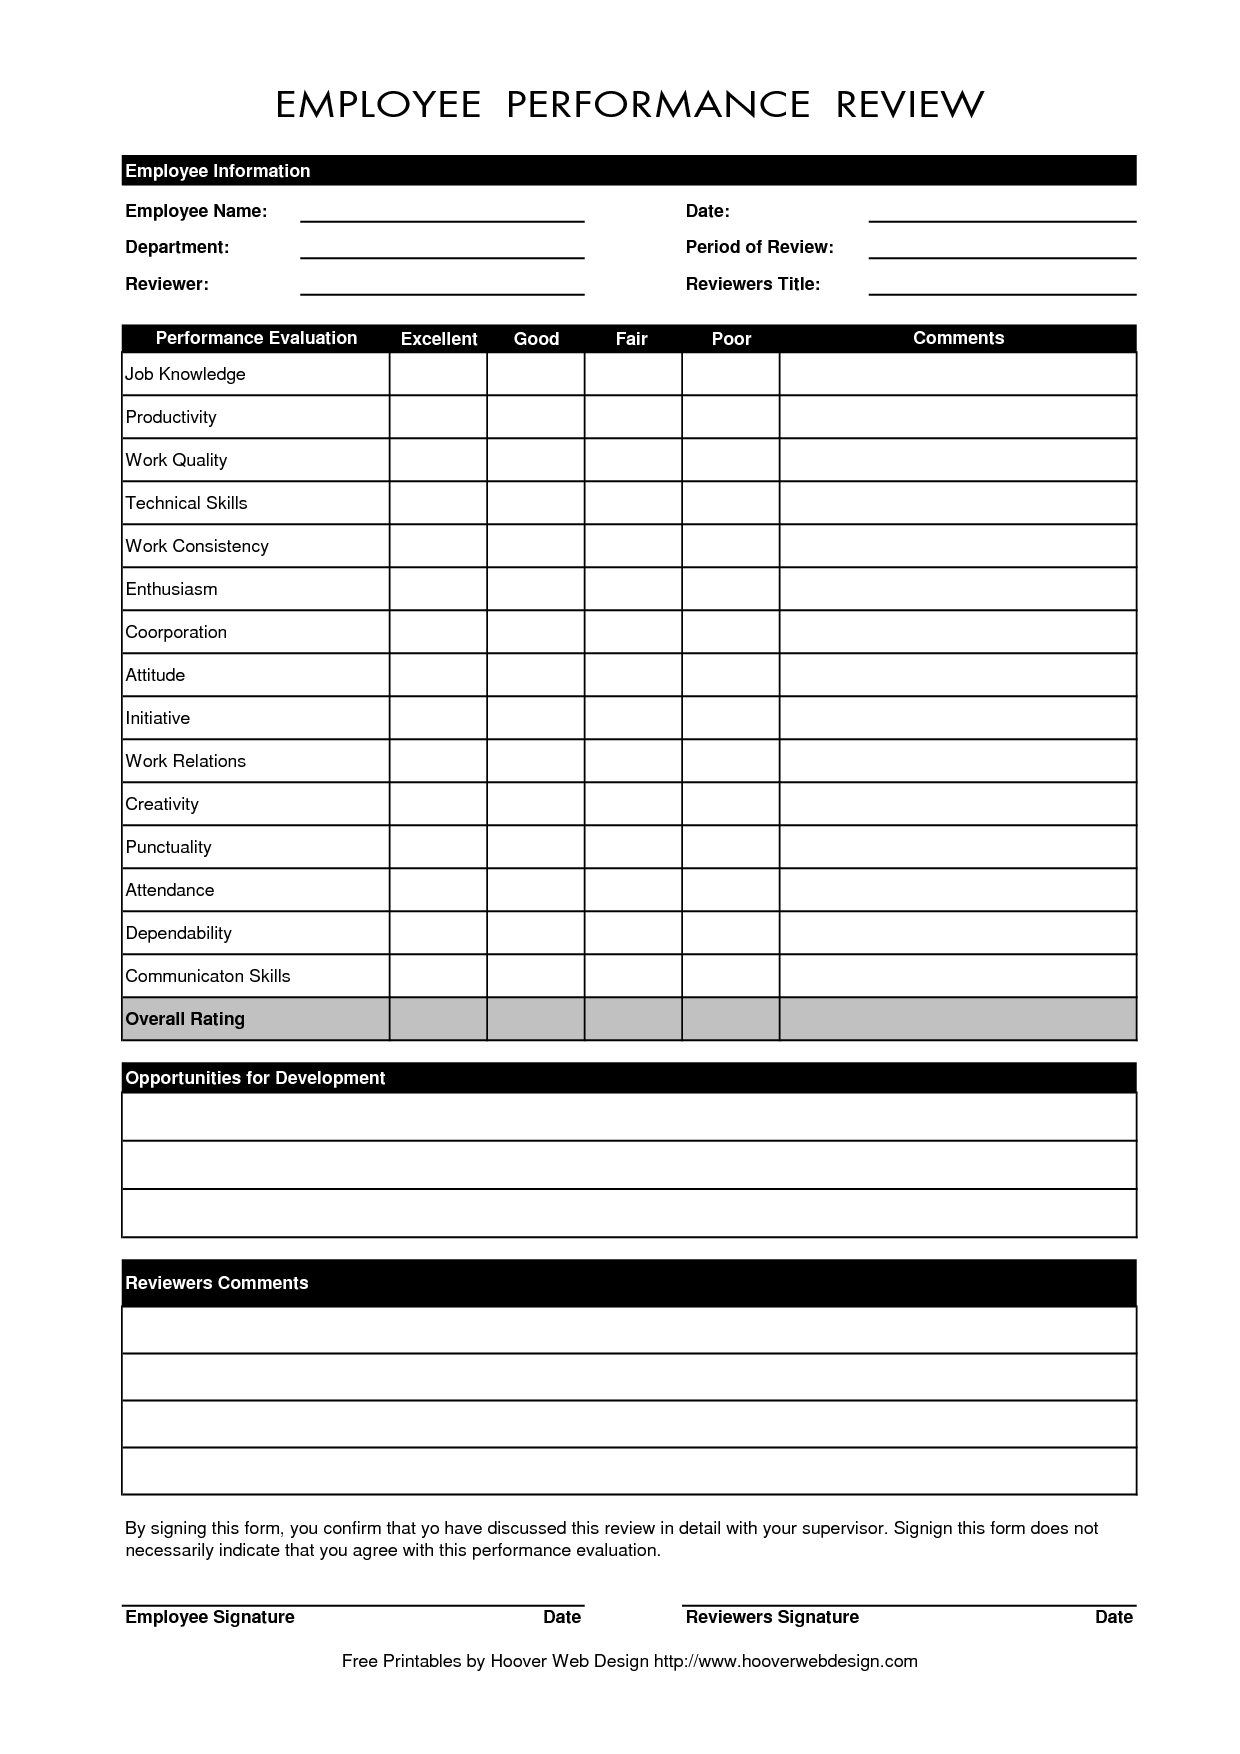 Free Employee Performance Review Forms | Excel | Employee - Free Employee Self Evaluation Forms Printable